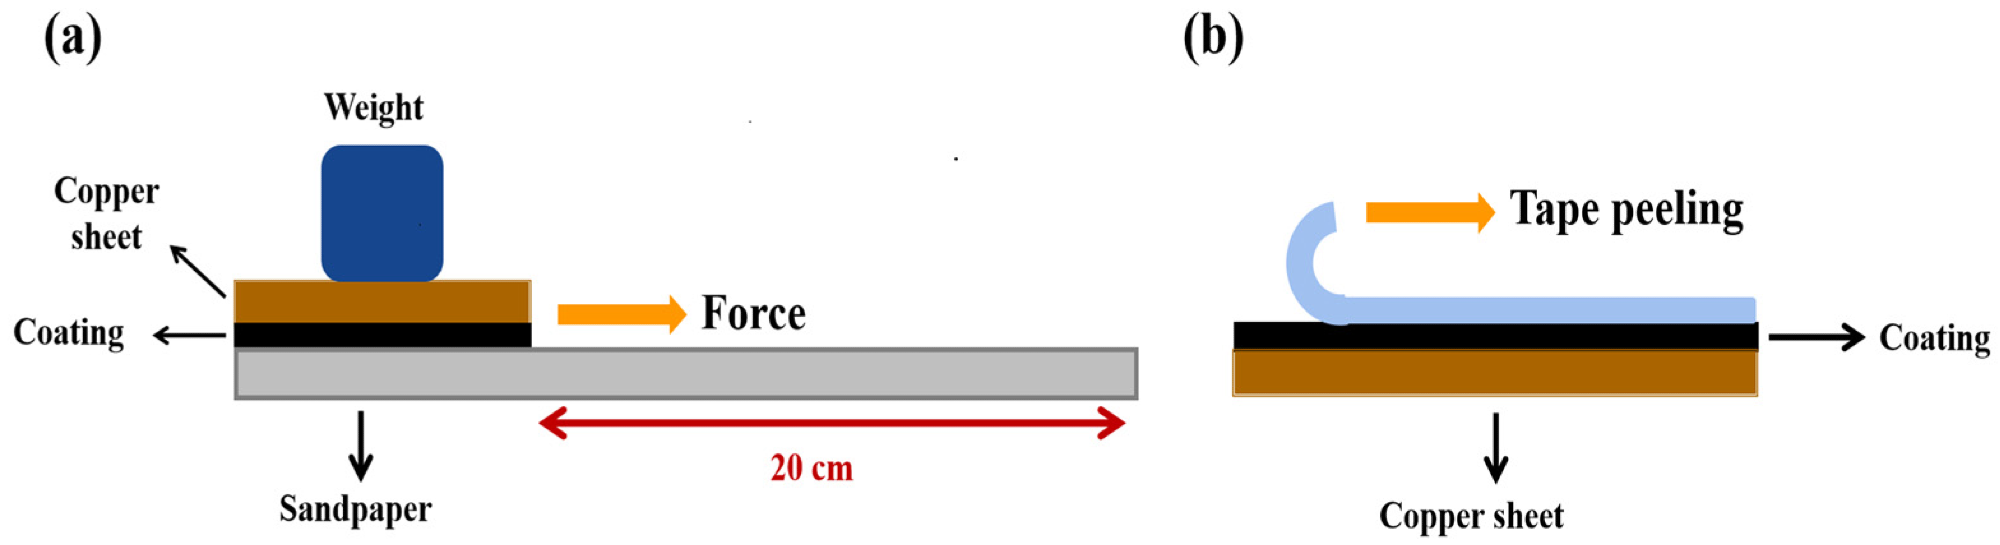 The schematic of sandpaper abrasion and tape peeling tests. (a) Sandpaper abrasion test (b) tape peeling test.